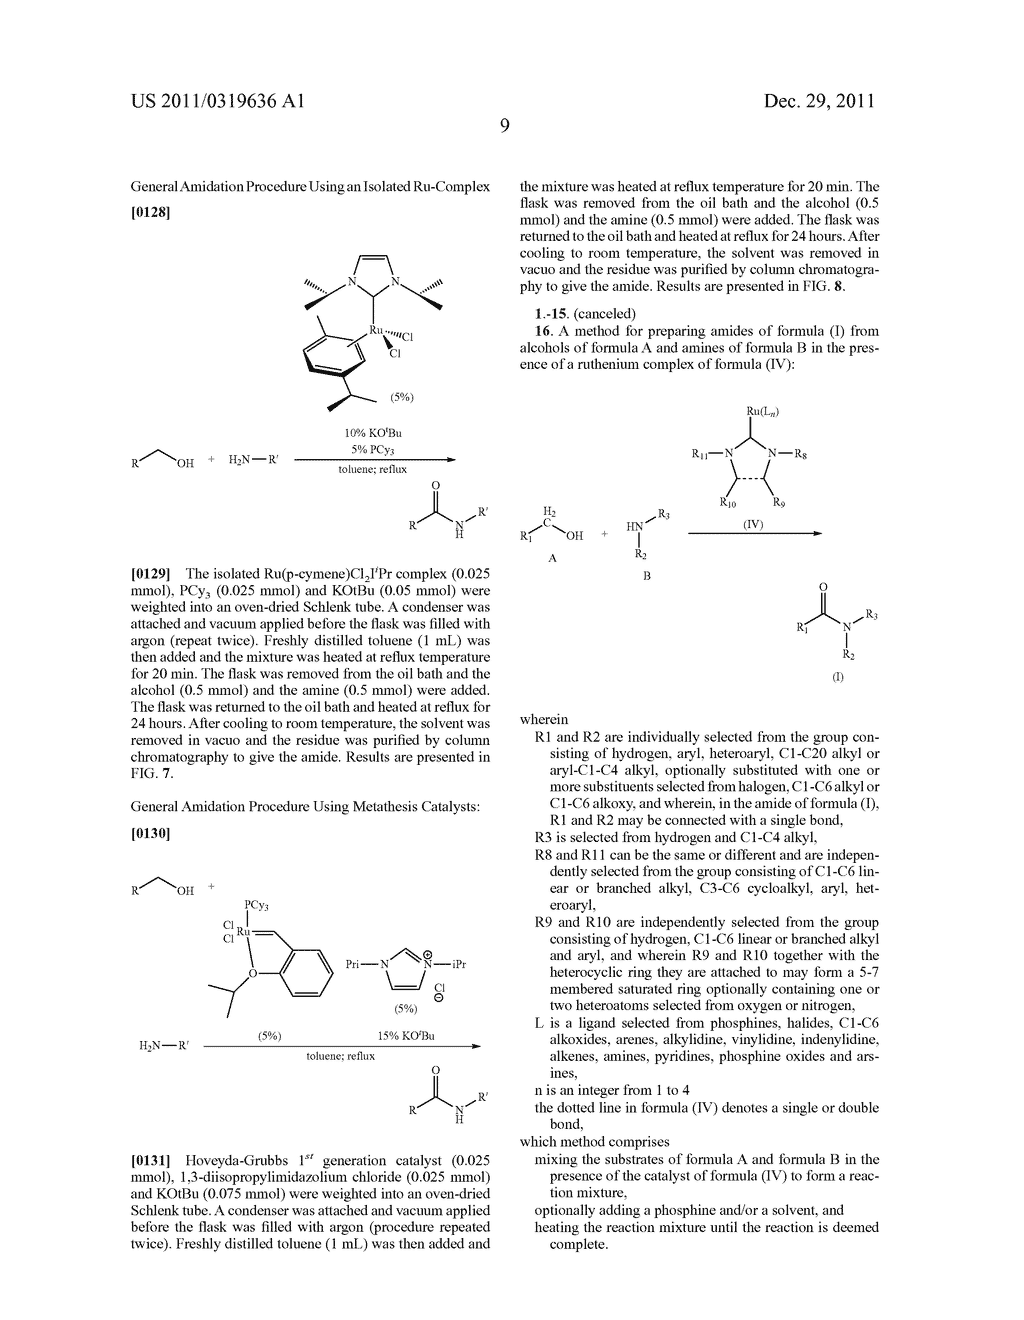 METHOD FOR PREPARATION OF AMIDES FROM ALCOHOLS AND AMINES BY EXTRUSION OF     HYDROGEN - diagram, schematic, and image 18